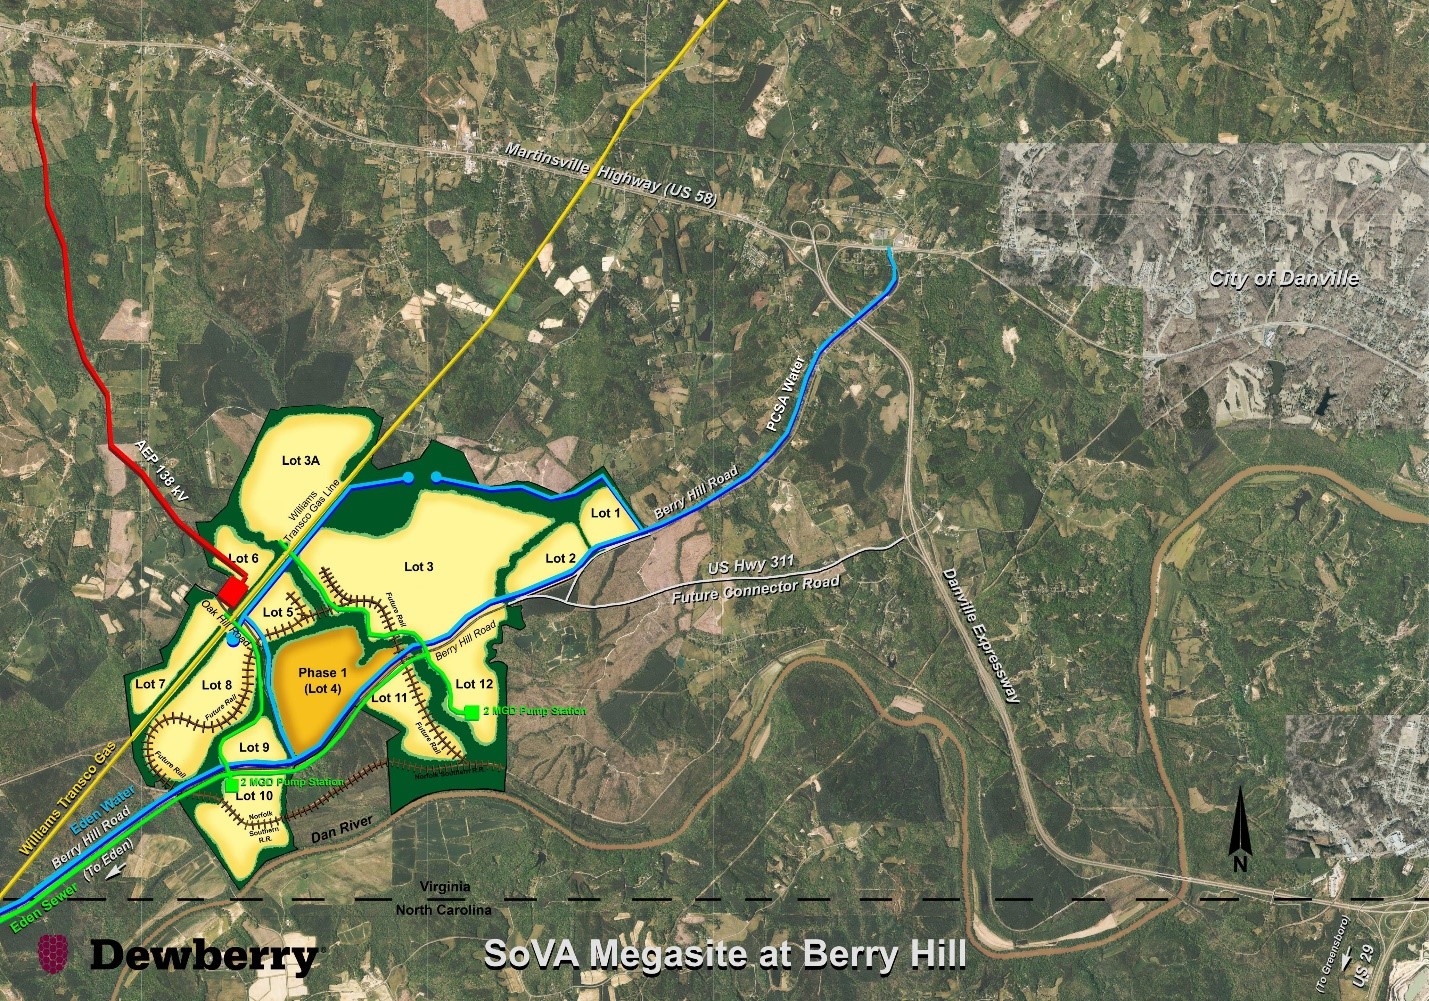 The 3,528 acre Southern Virginia Megasite at Berry Hill is attractive to large original equipment manufacturing (OEM) operations and other large advanced industrial users in part because of the many transporation options it offers.